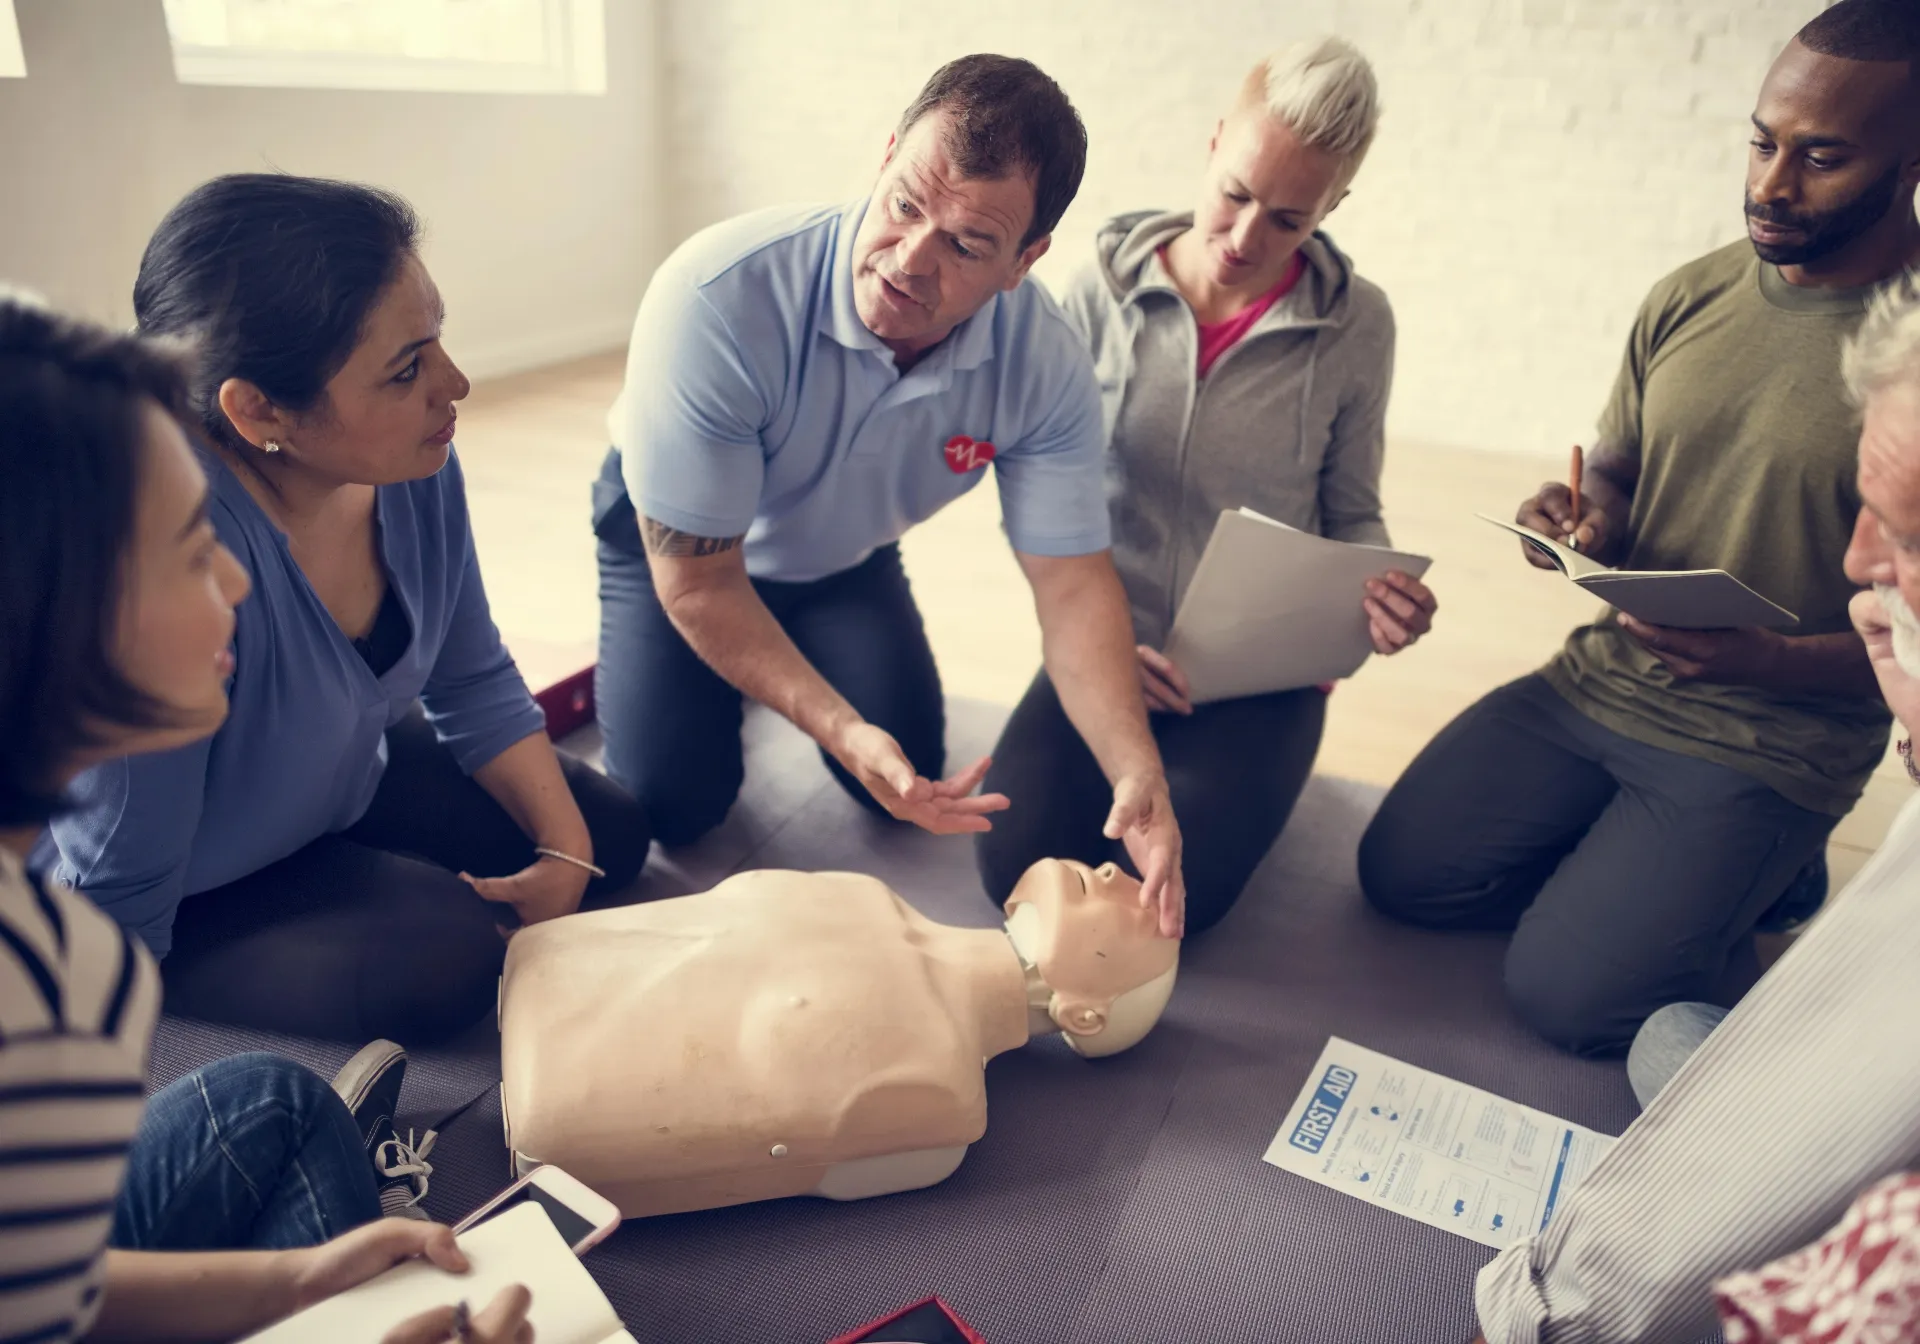 A skilled man demonstrating proper CPR techniques to others.